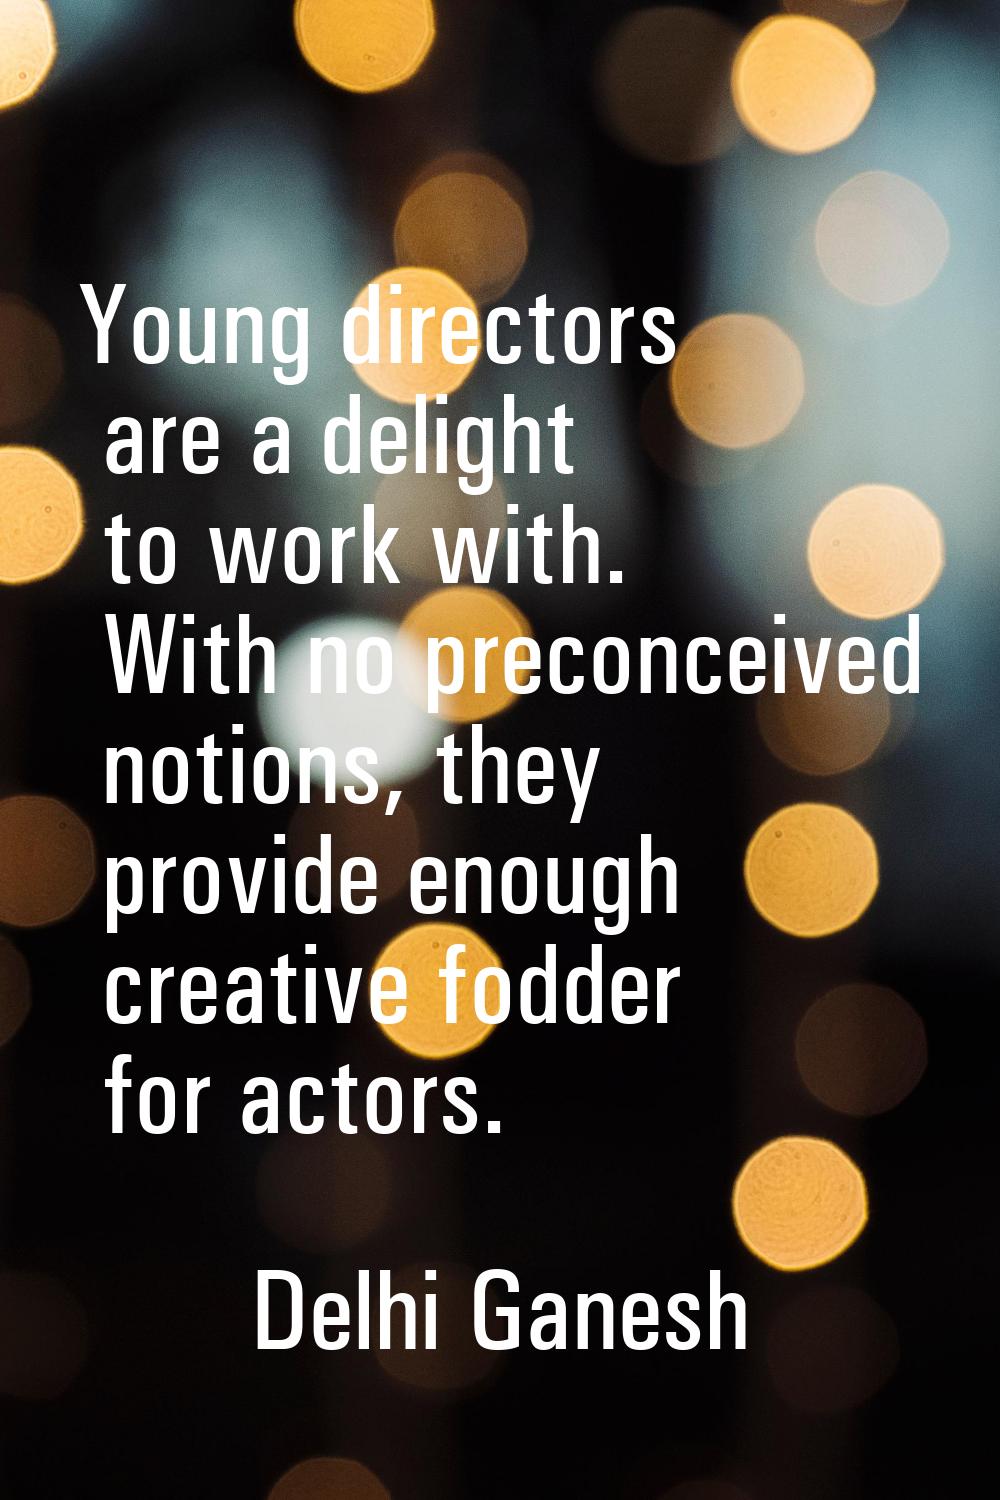 Young directors are a delight to work with. With no preconceived notions, they provide enough creat